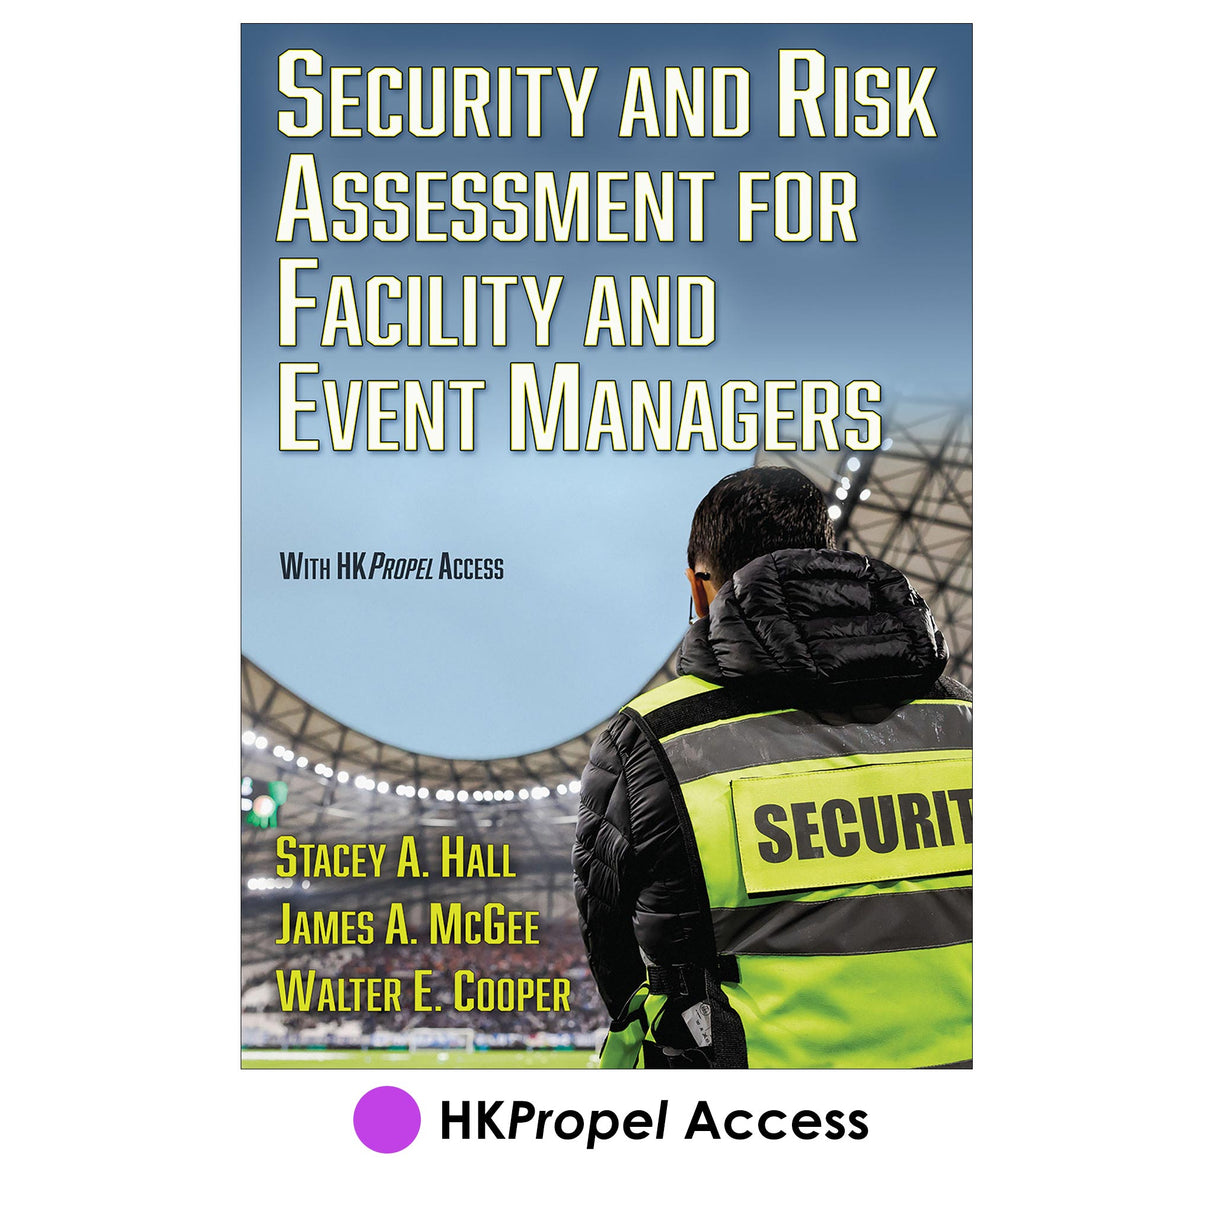 Security and Risk Assessment for Facility and Event Managers HKPropel Access